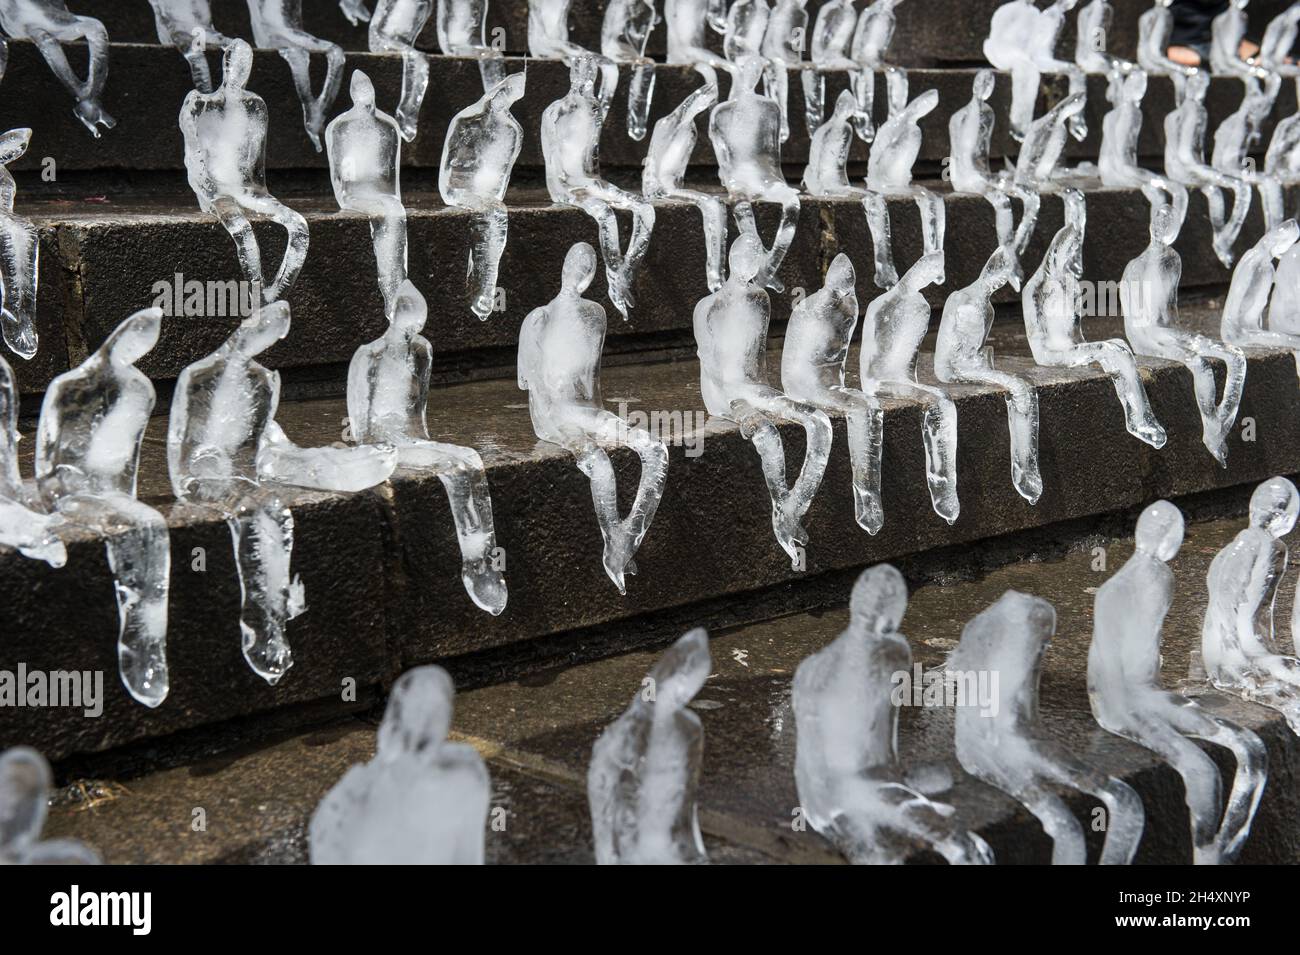 For the first time in Great Britain, Brazilian artist Nele Azevedo creates a breathtaking display of over 5,000 figures made out of ice on 2nd August at Chamberlain Square - Birmingham Stock Photo